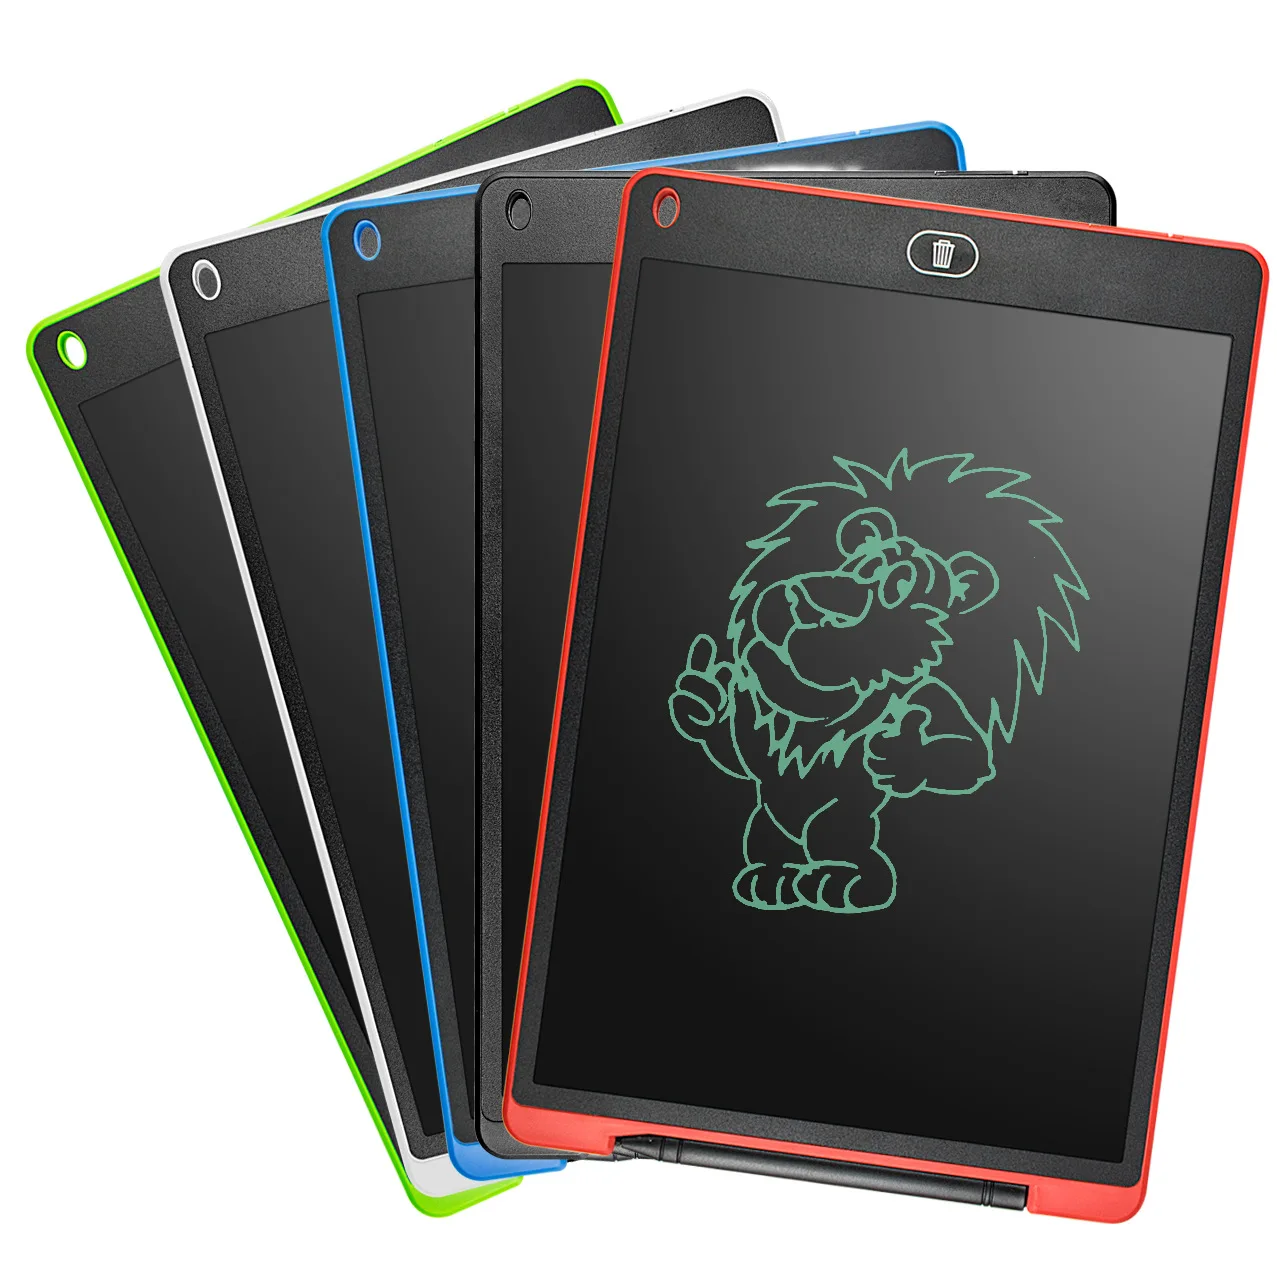 8.5inch LCD Writing Tablet Electronic Writting Doodle Board